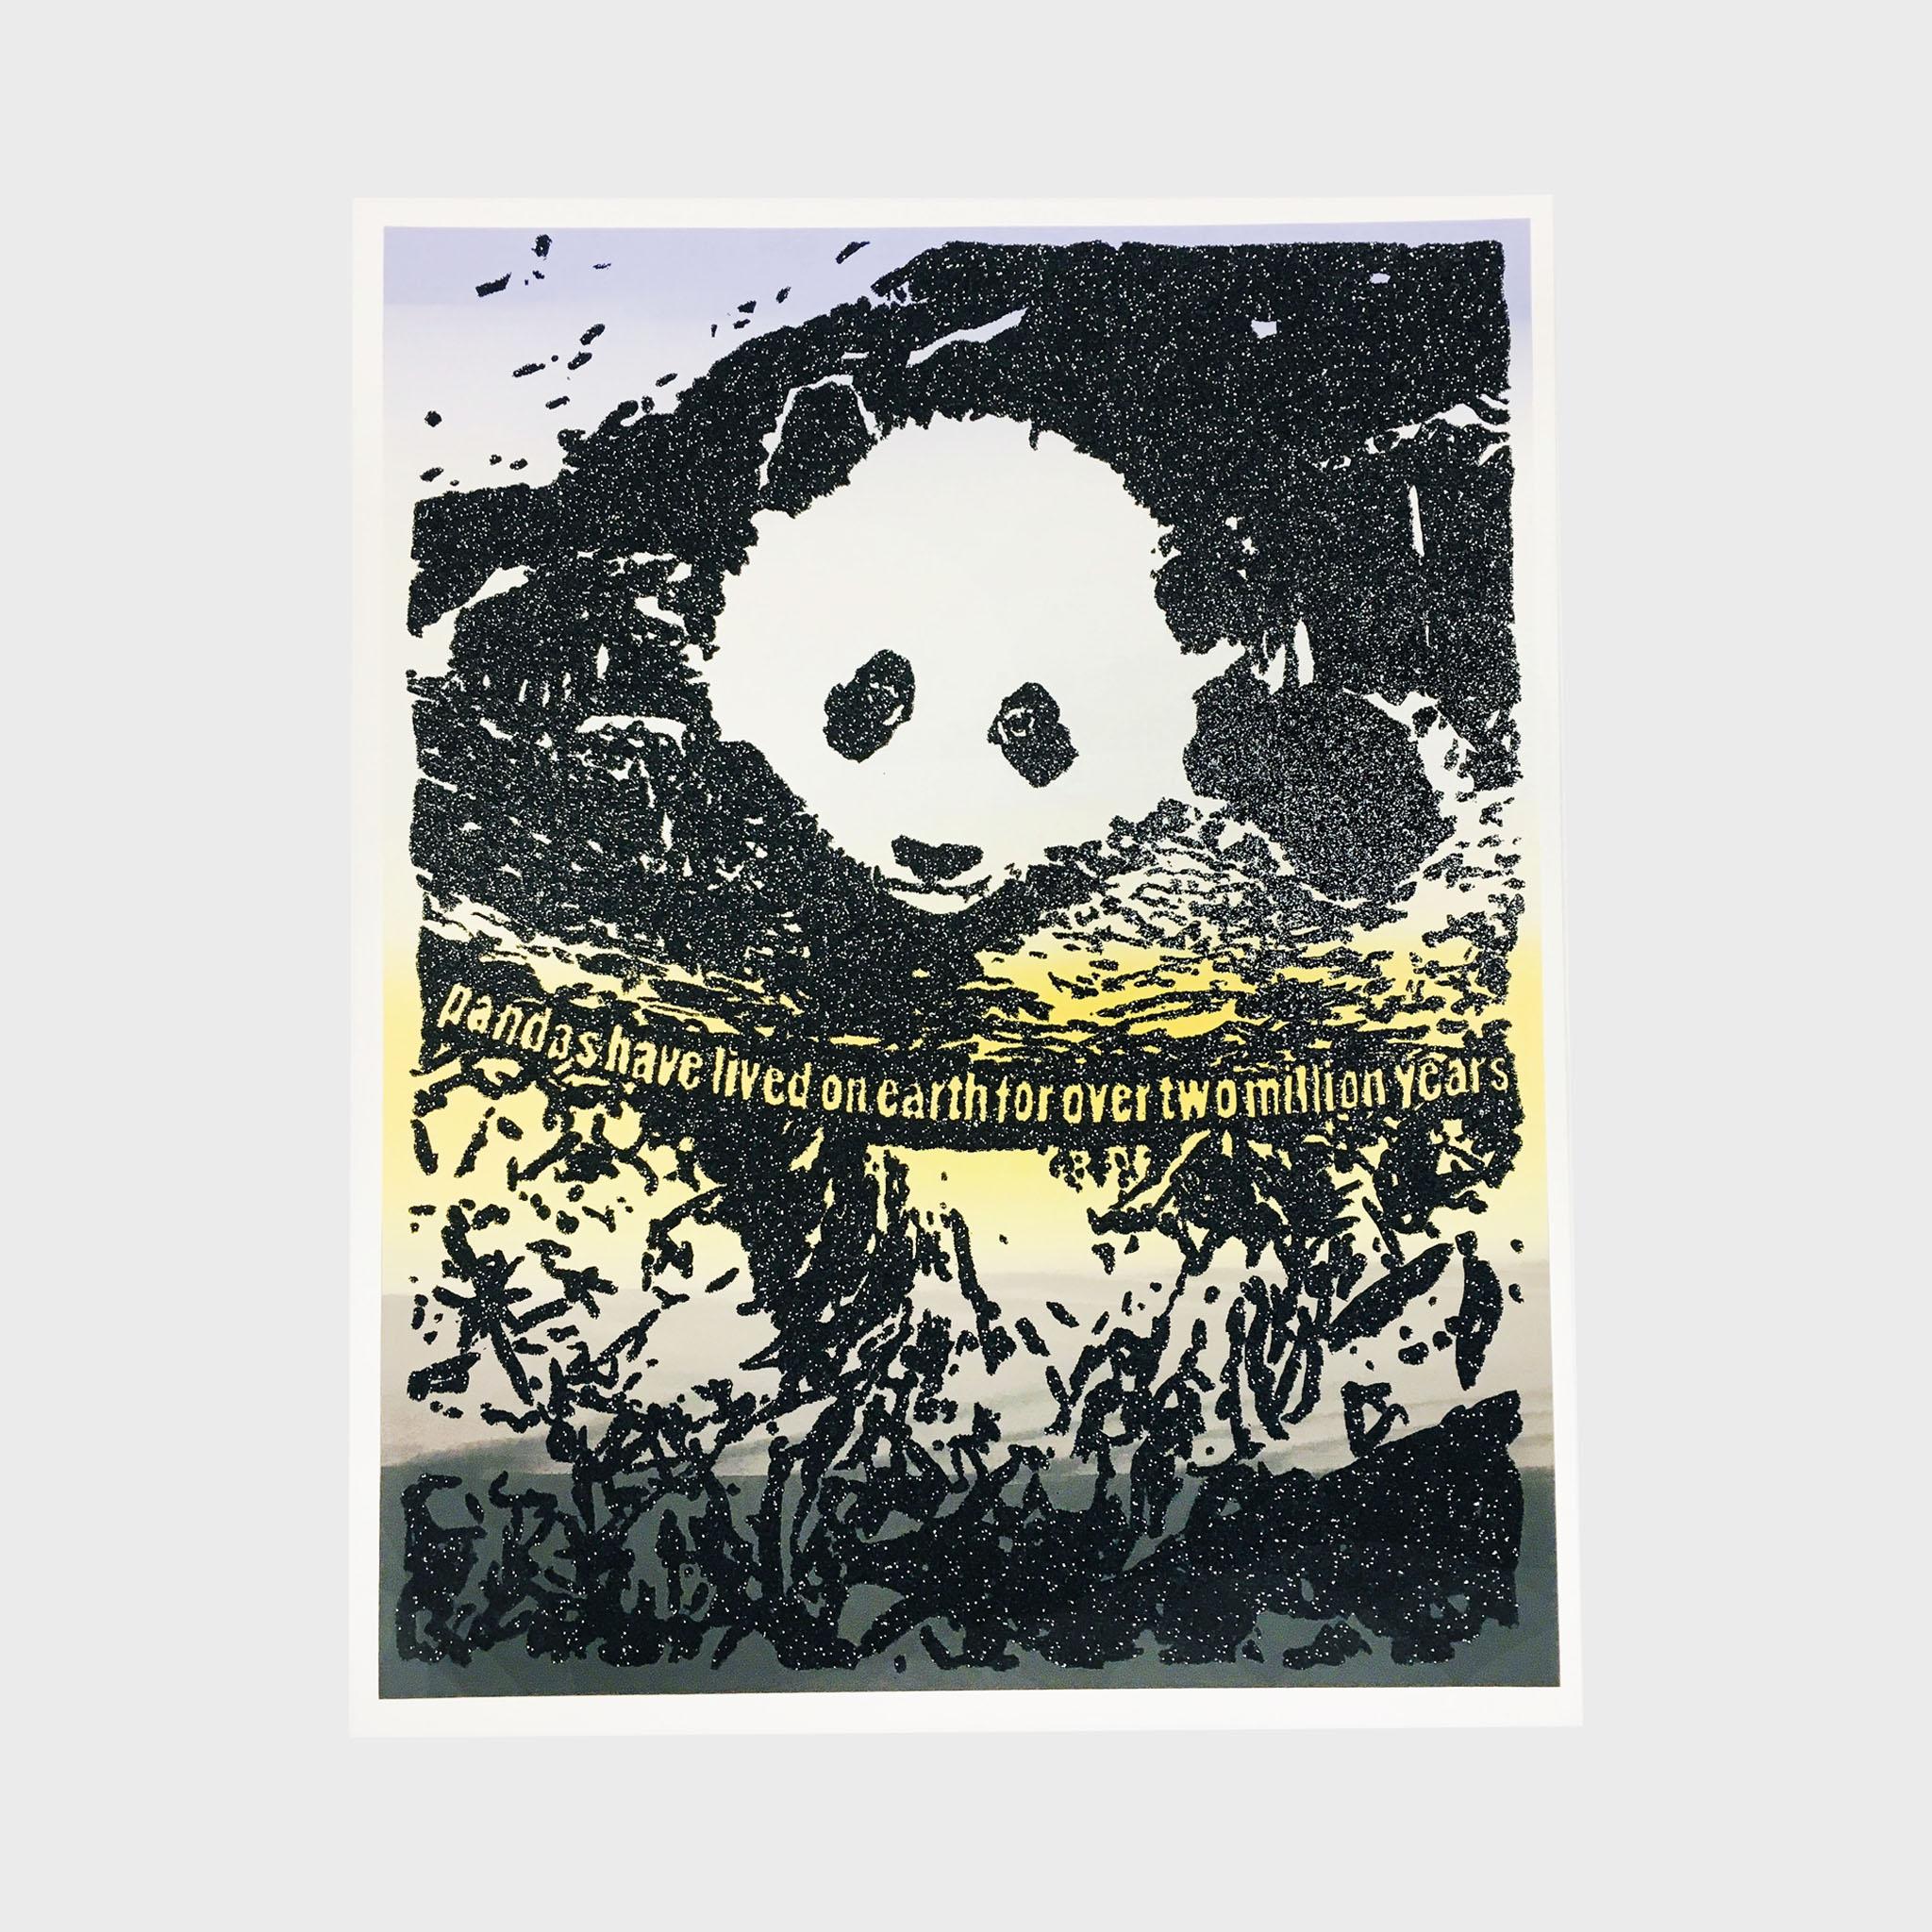 Giant Pandas Spend About 12 Hours a Day Eating - Print by Rob Pruitt